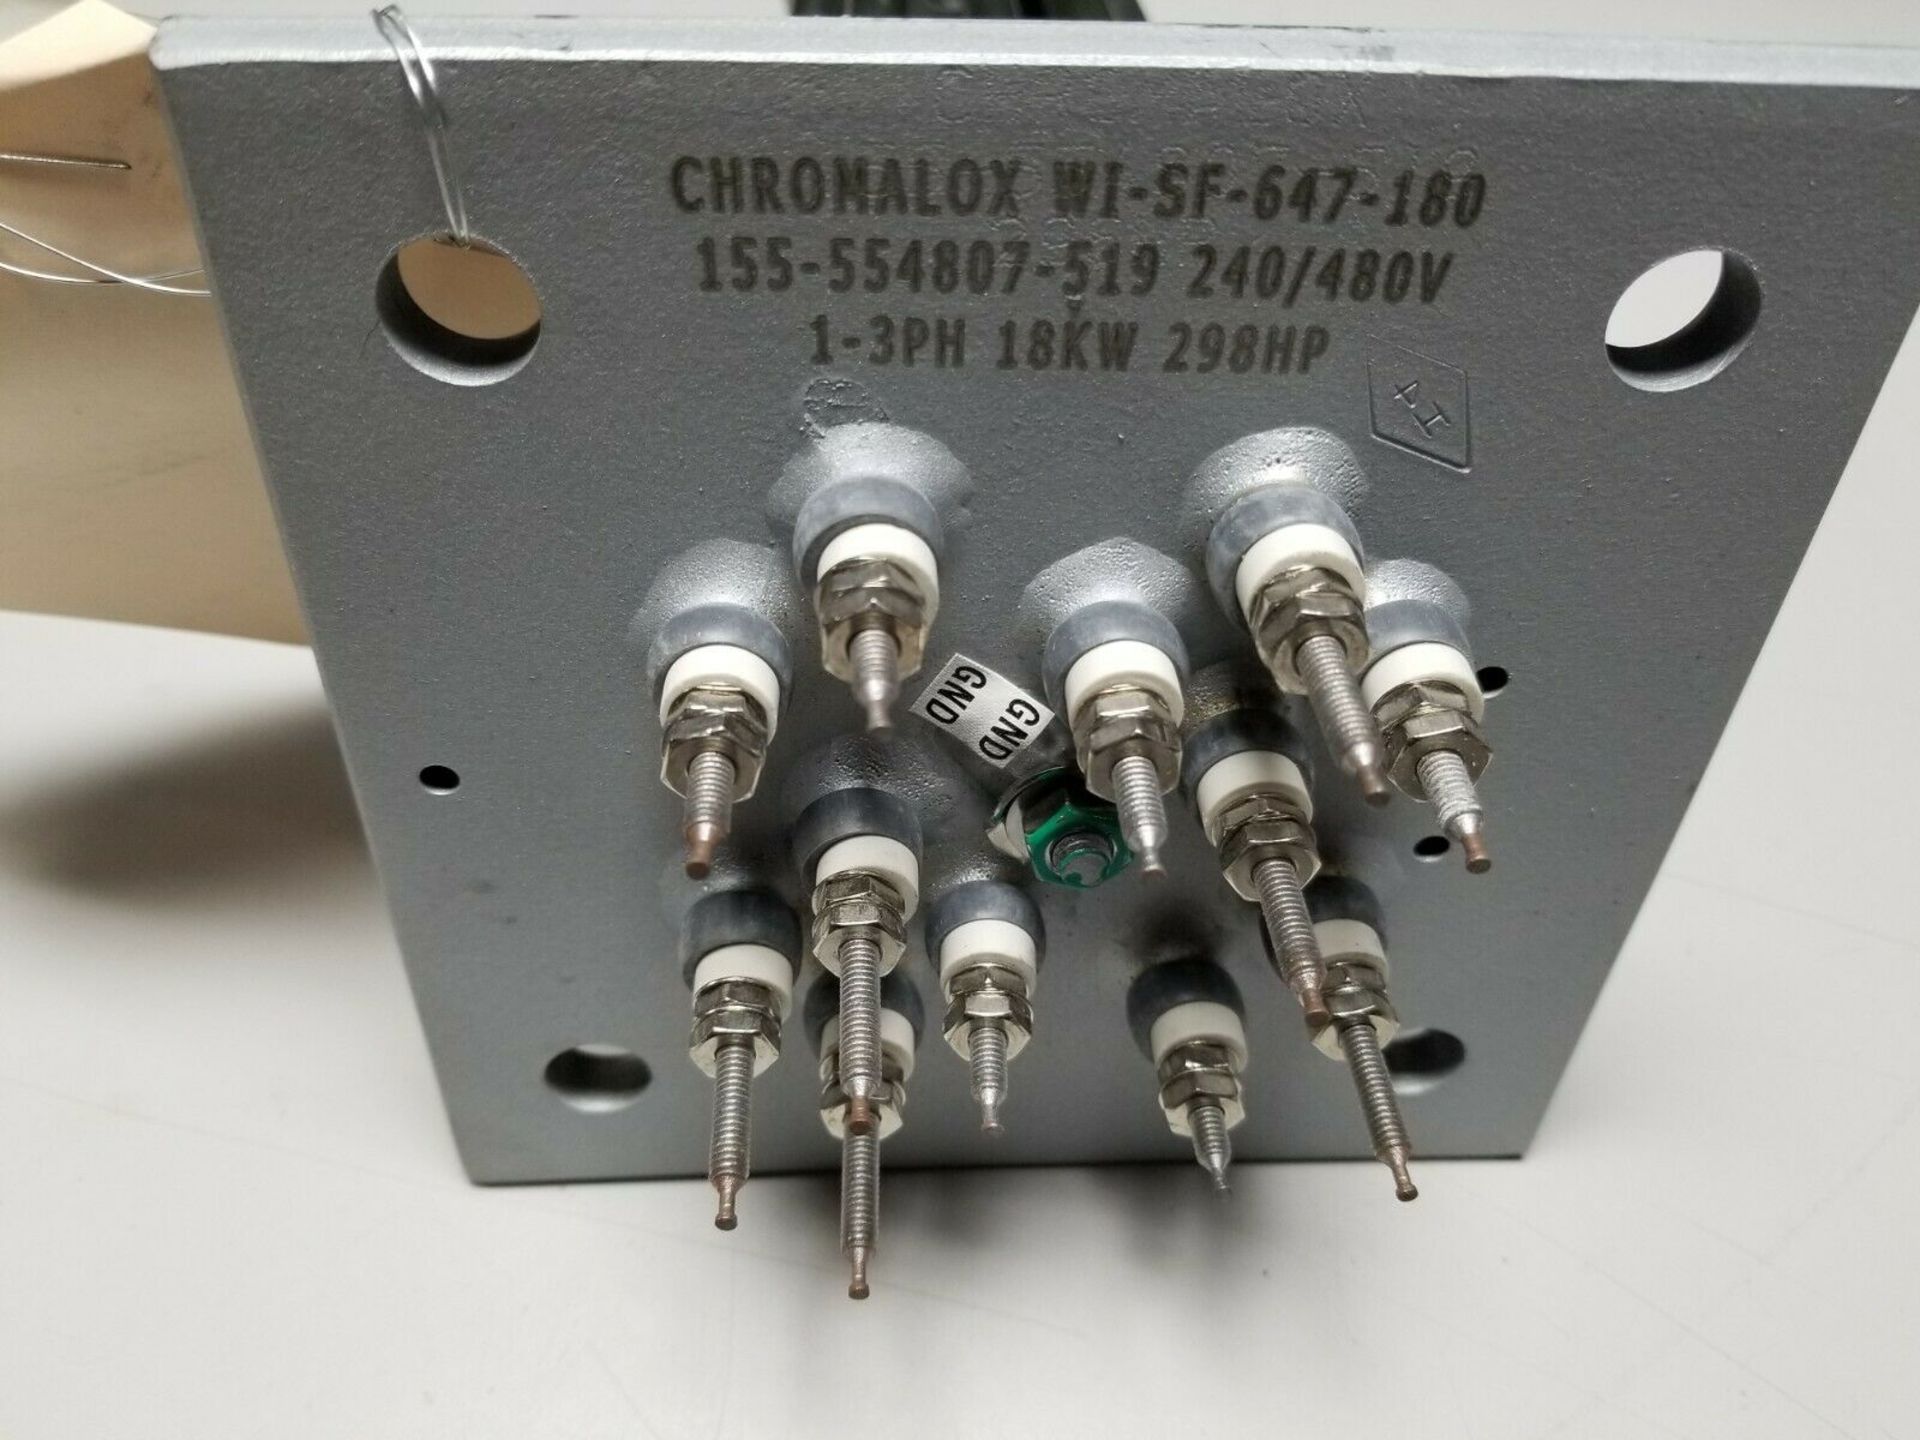 New Chromalox Immersion Heater - Image 3 of 5